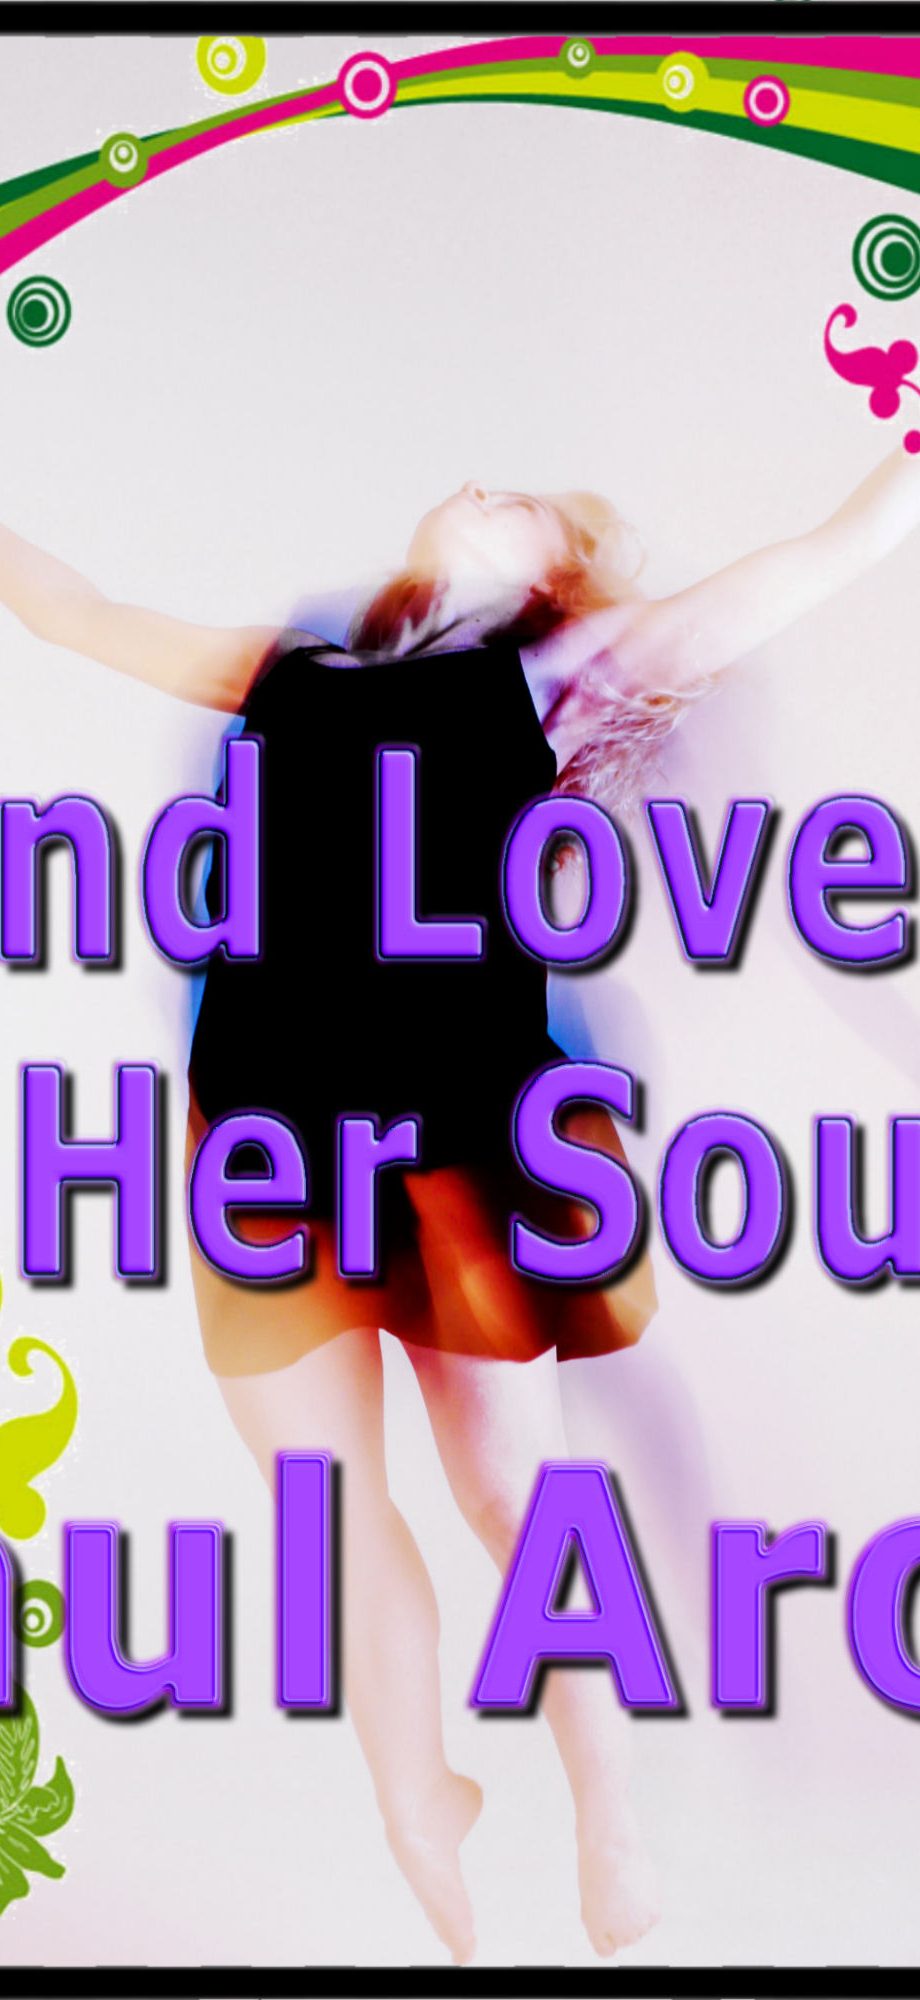 Find Love In Her Soul is a new single written and performed by Paul Arow.